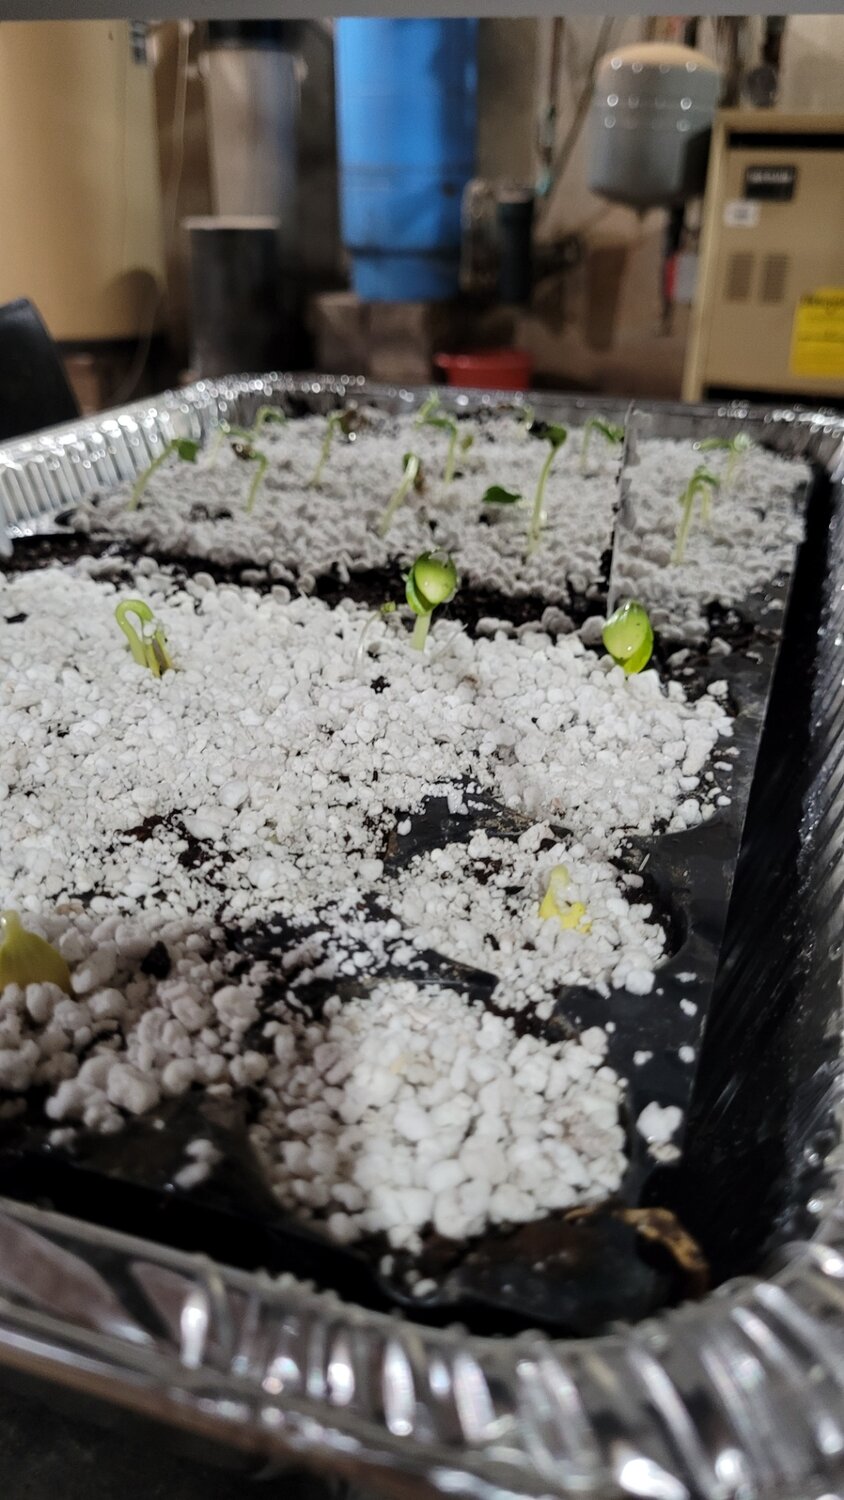 Some seedlings will be ready for transplanting soon enough.